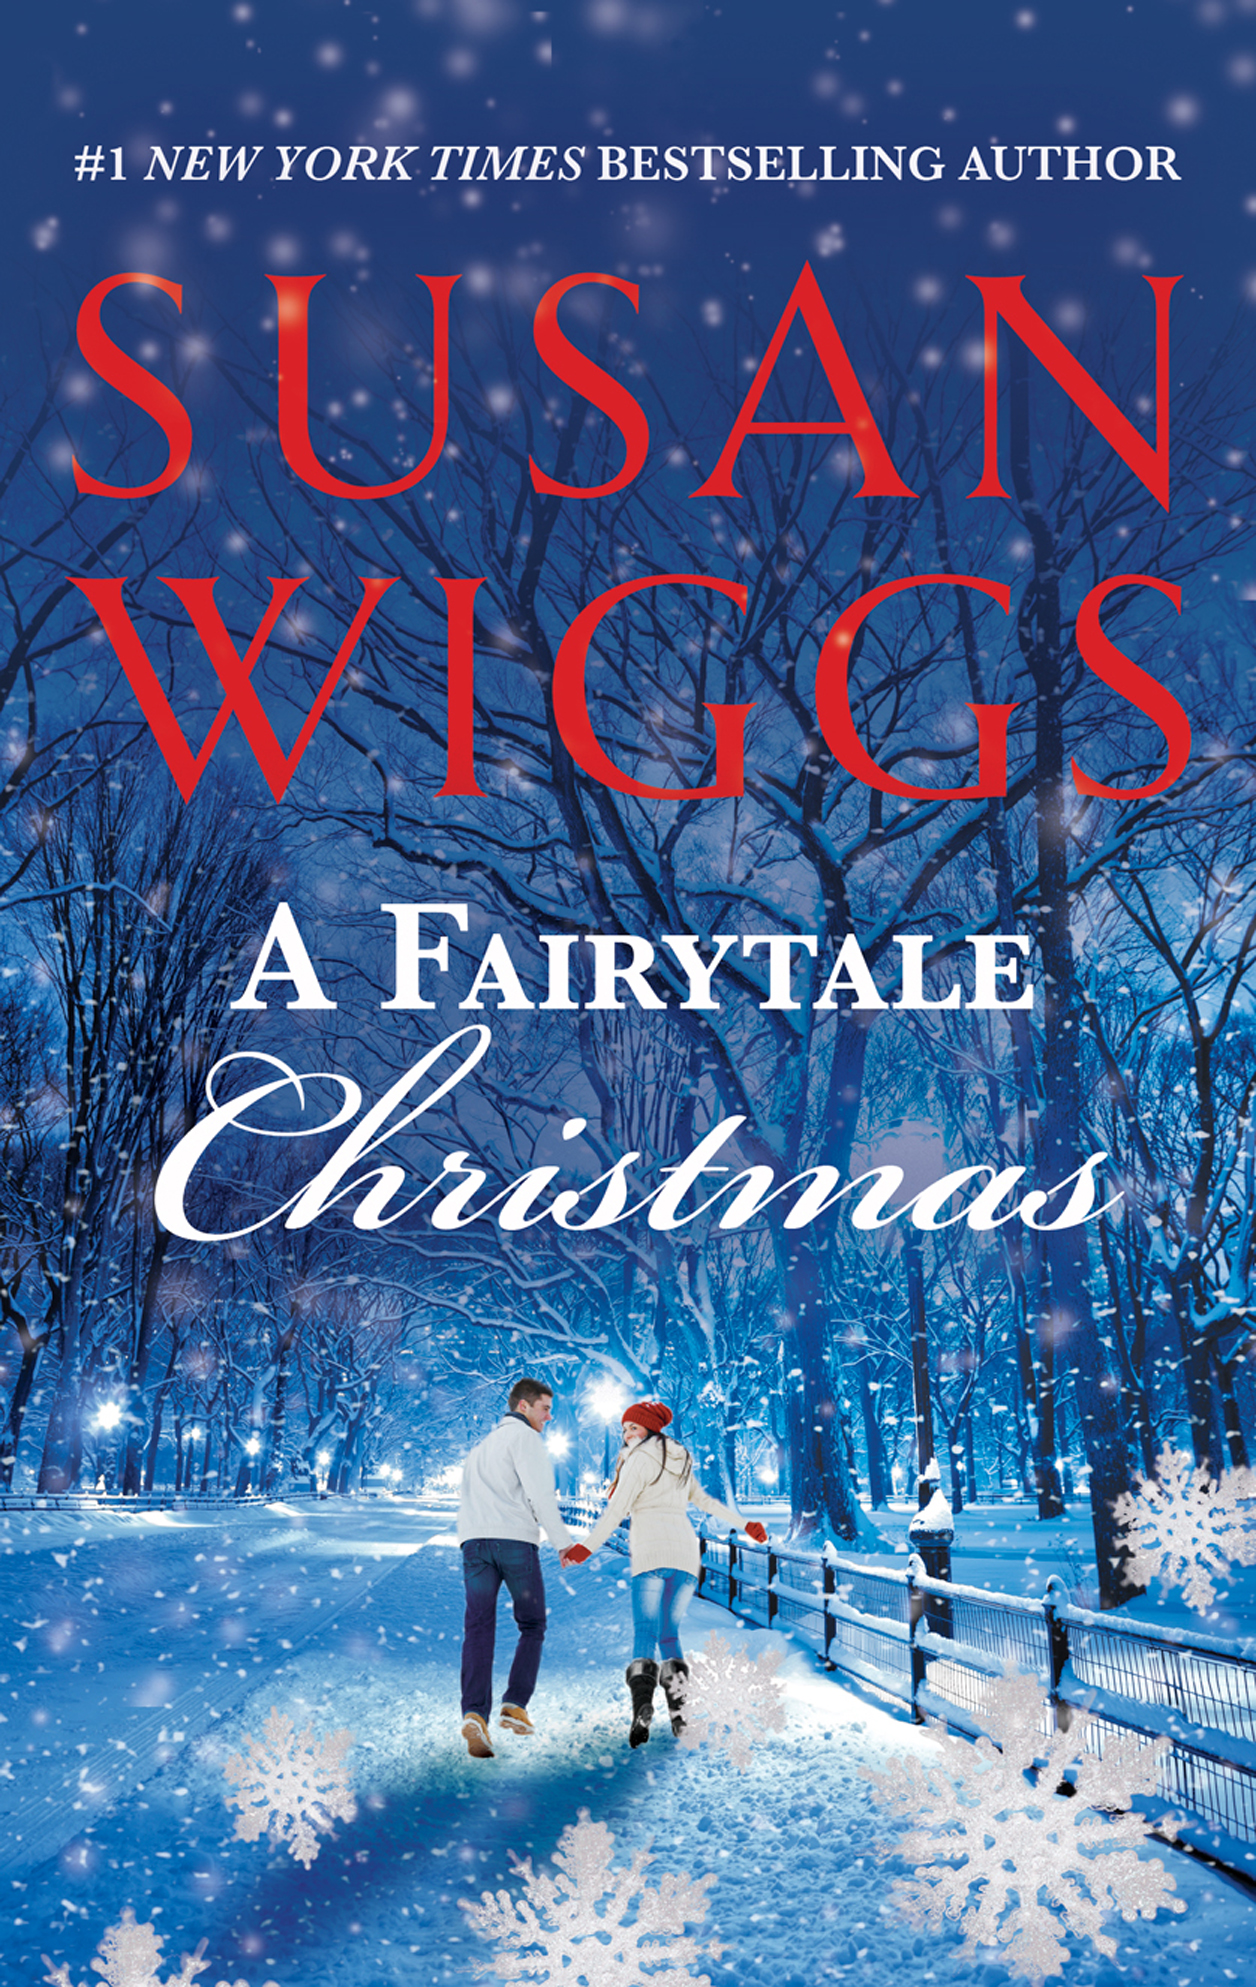 A Fairytale Christmas (1996) by Susan Wiggs